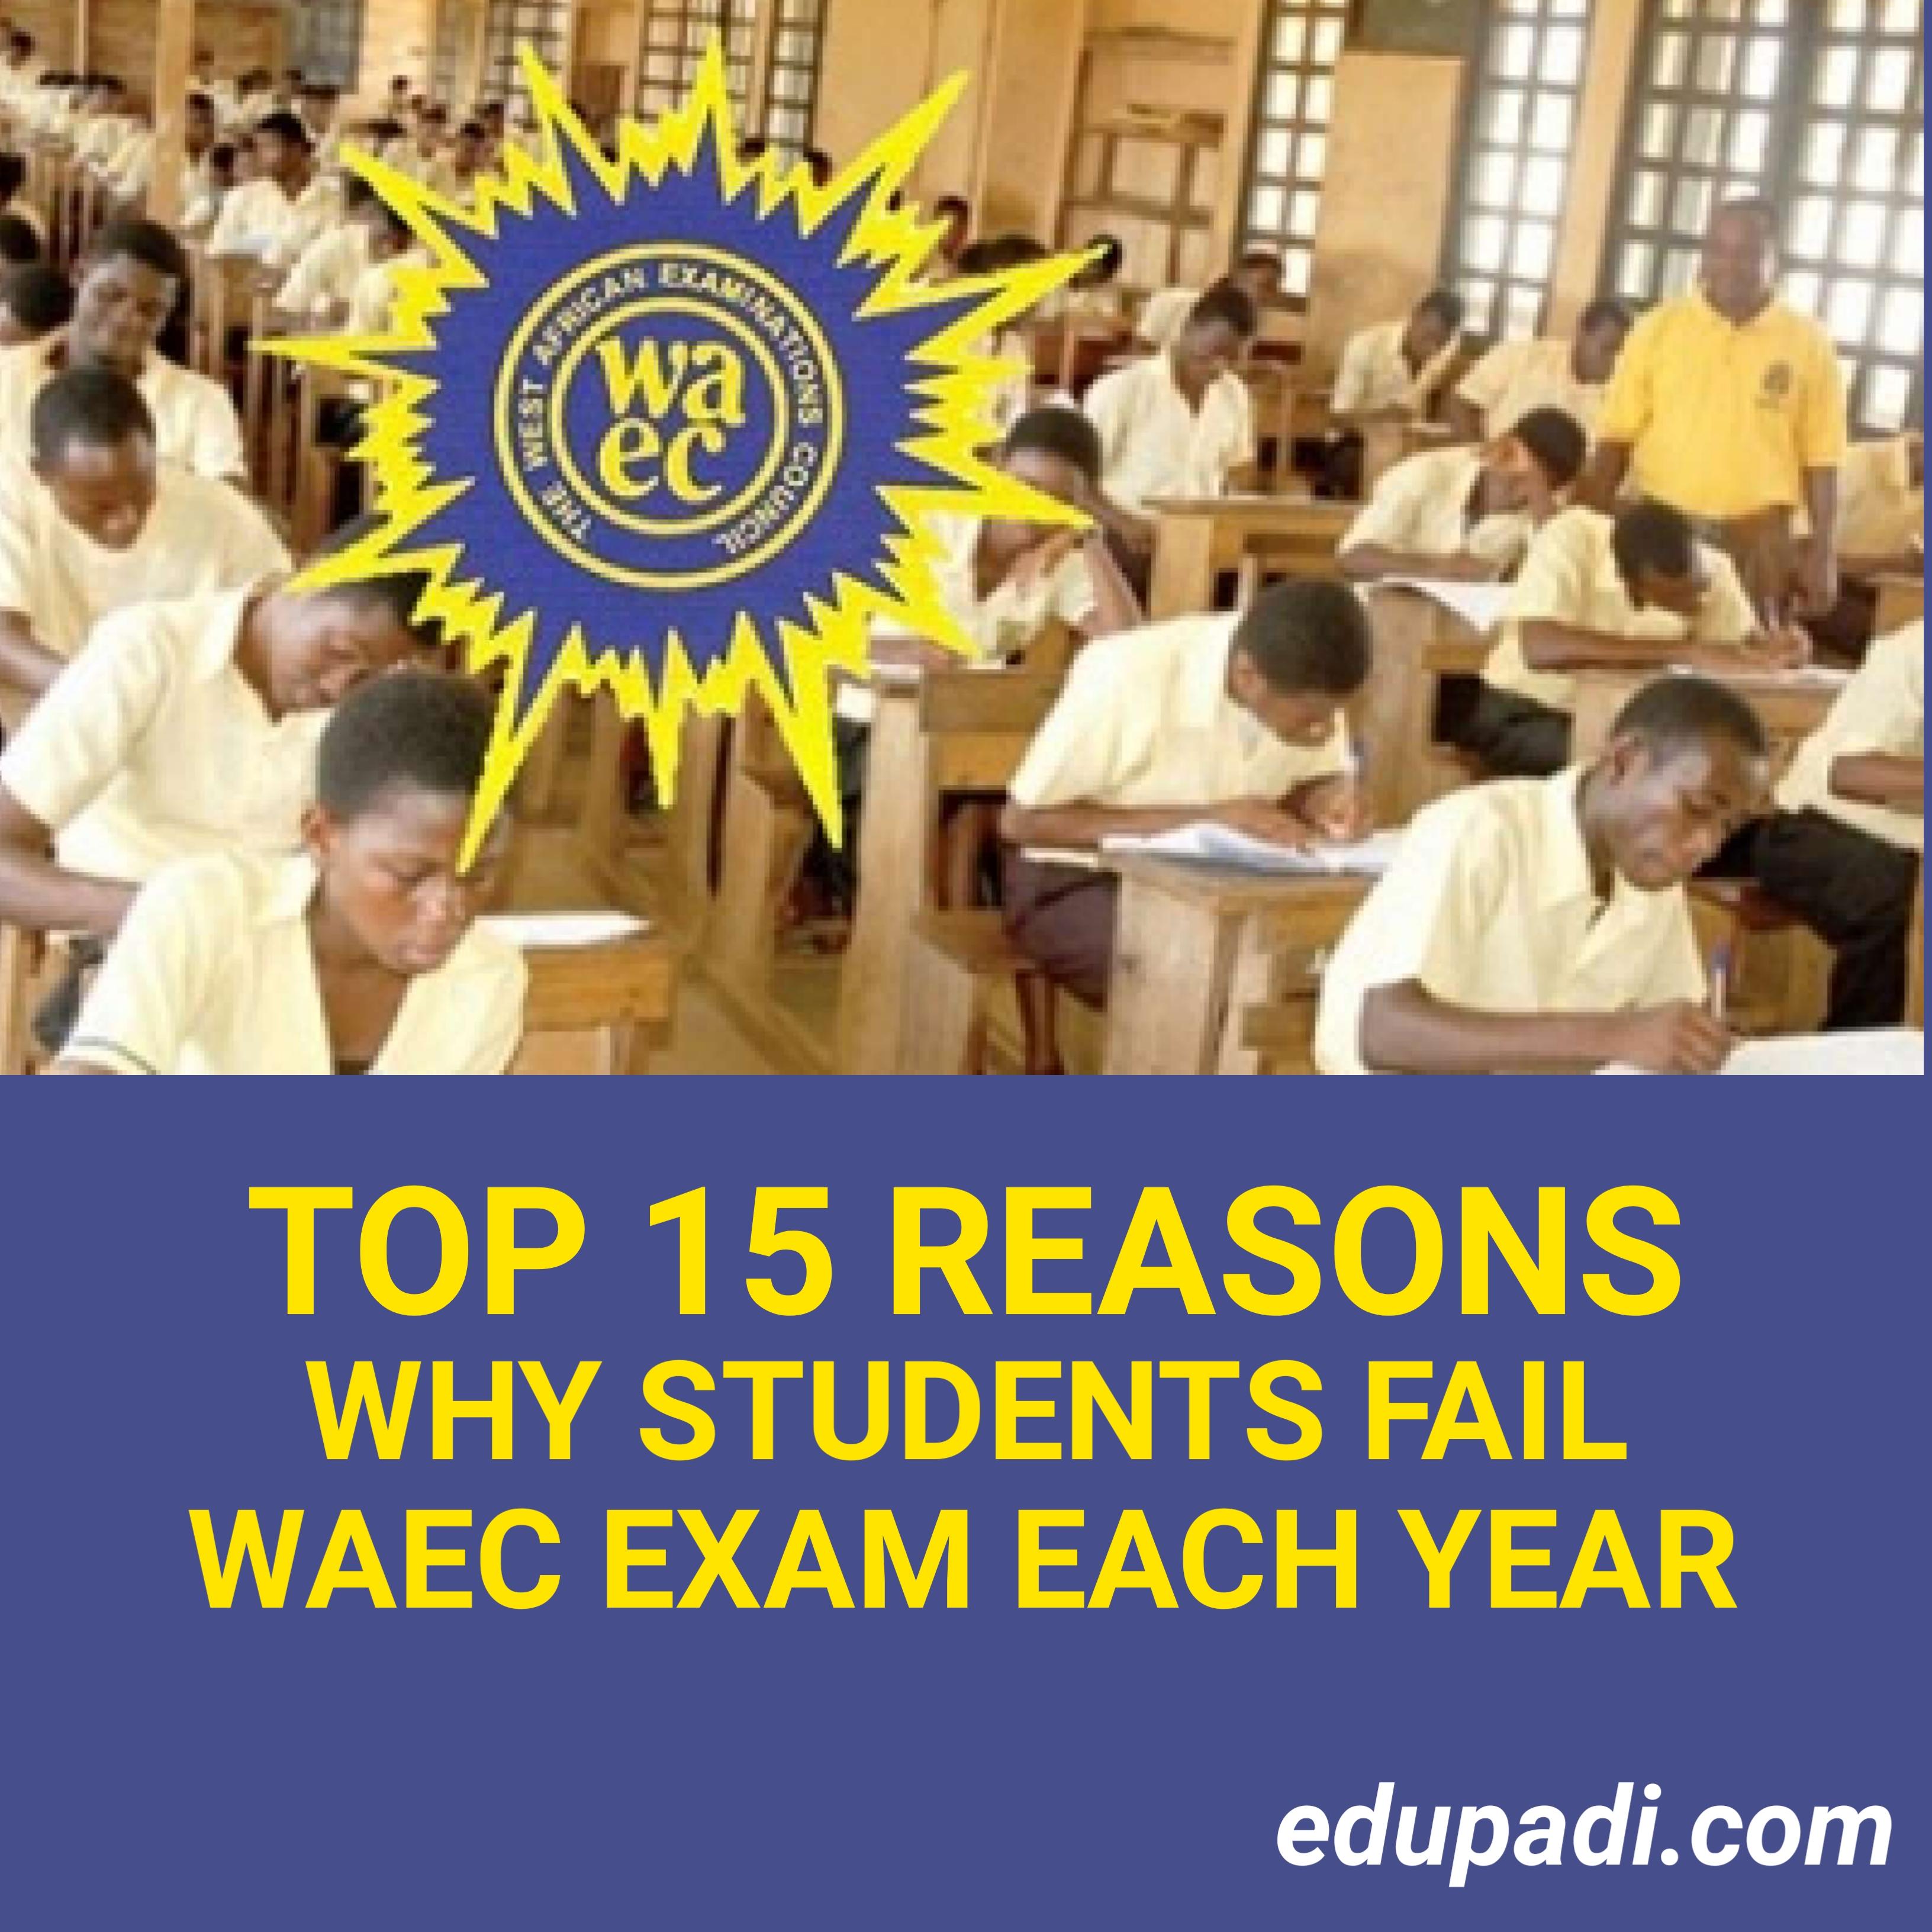 Cover Image for Top 15 Reasons Why Students Fail WAEC Exam